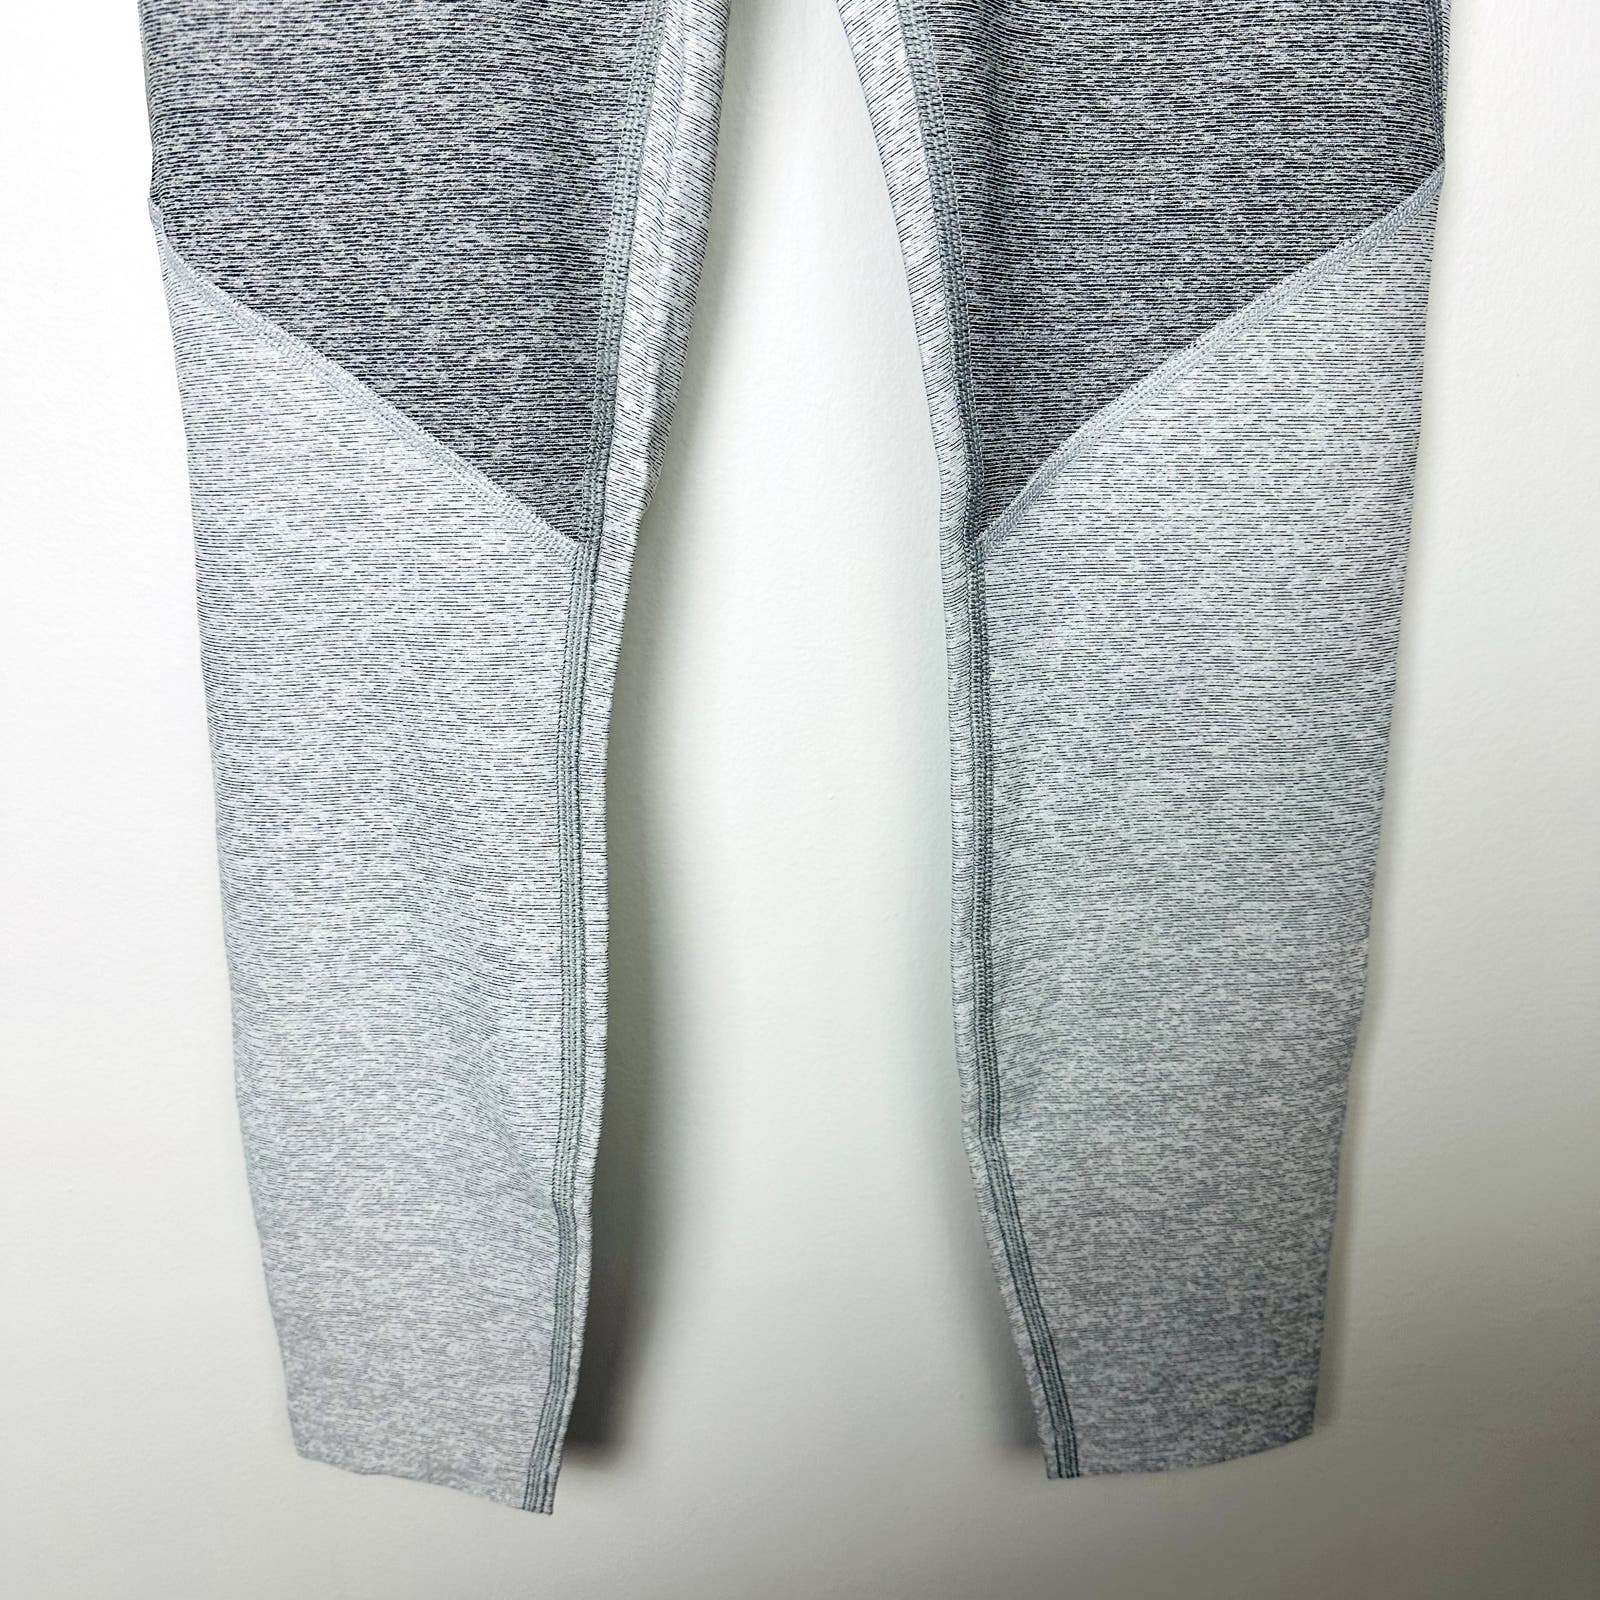 Outdoor Voices NWT Dove Ash Warmup 3/4 Legging Size XS